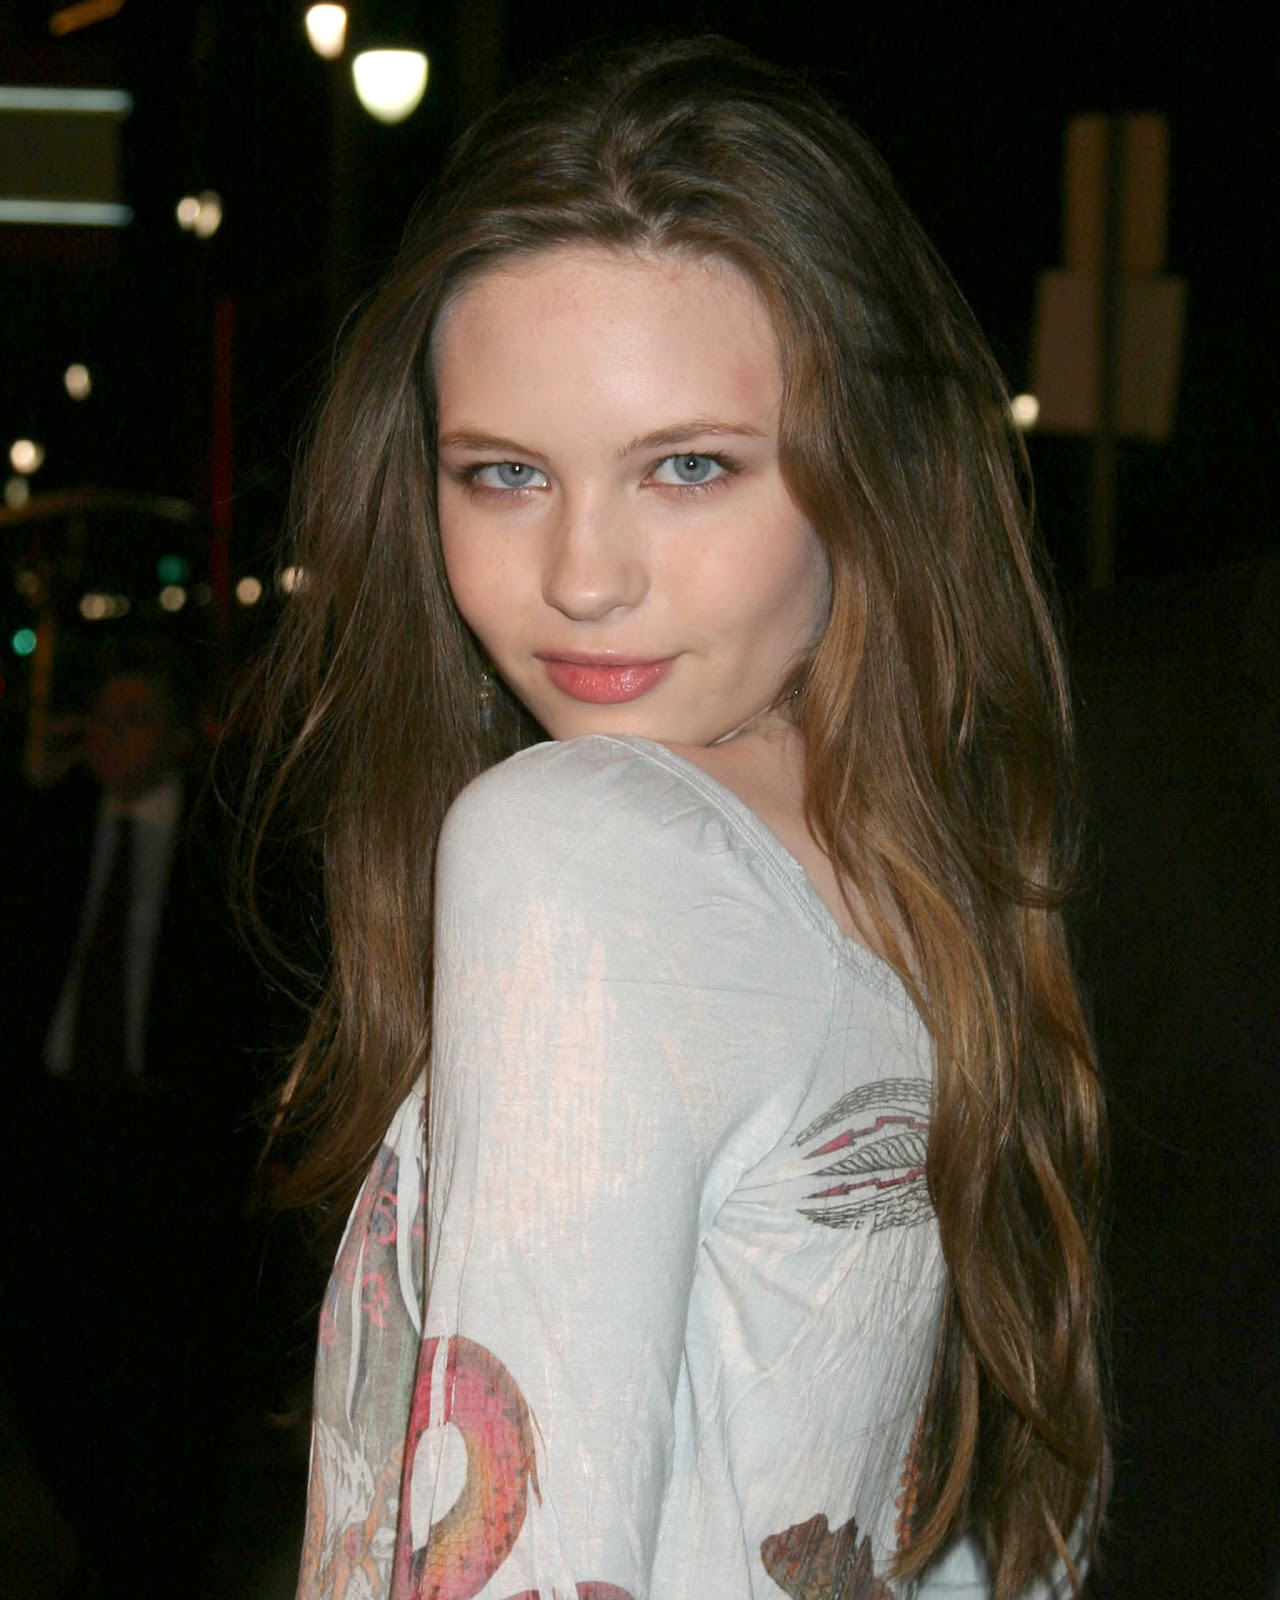 Image result for Daveigh Chase blogspot.com